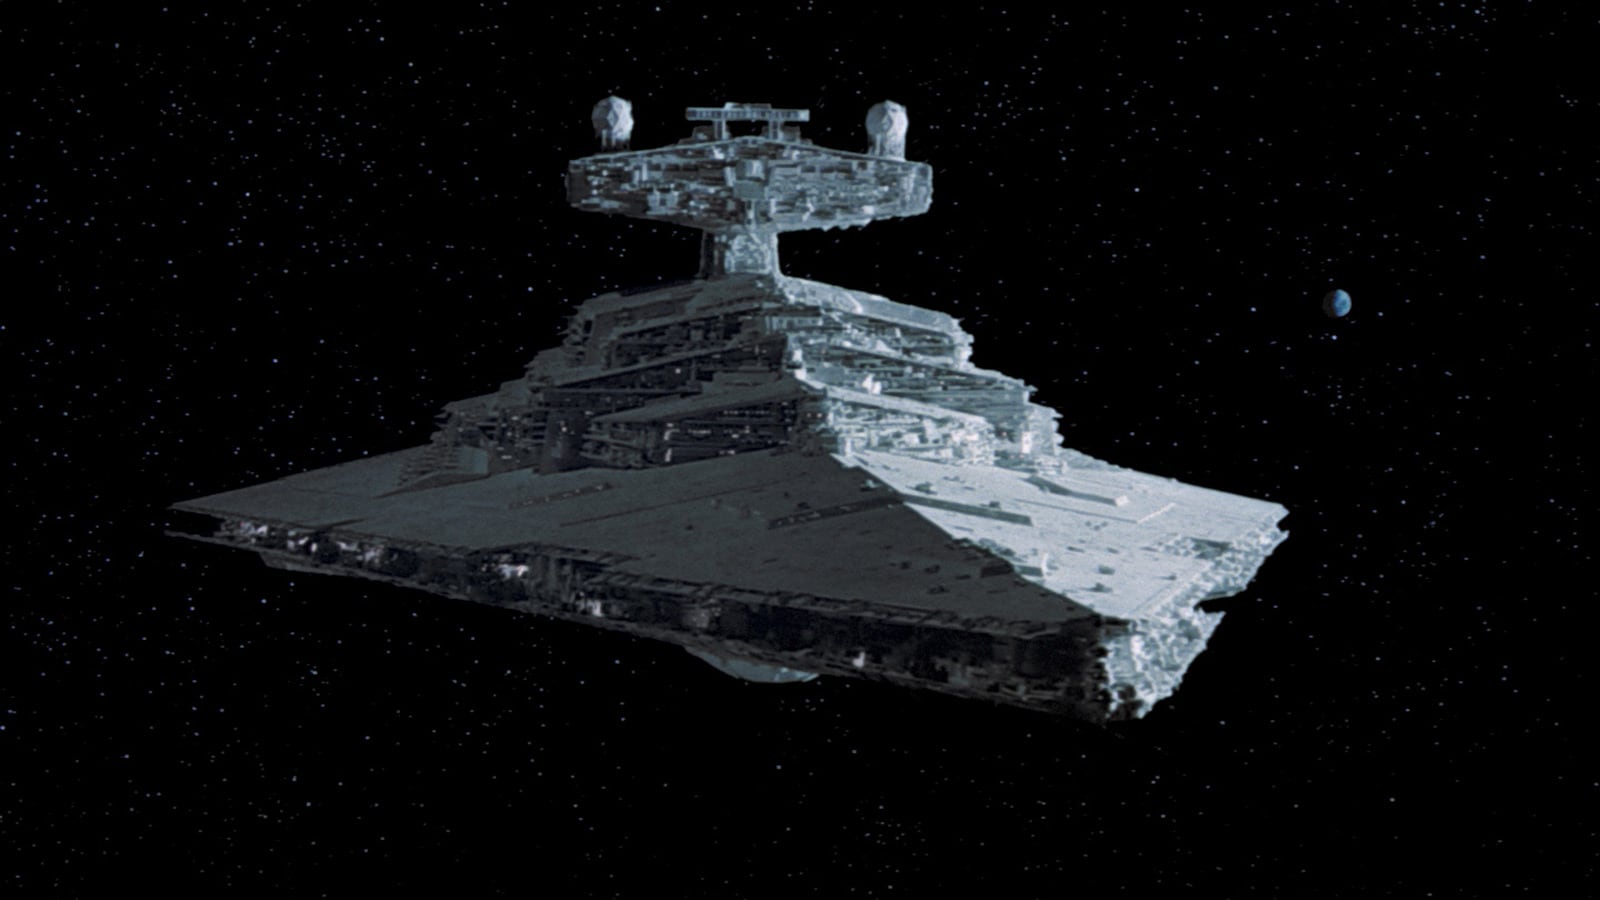 What is the Star Wars Star Destroyer?